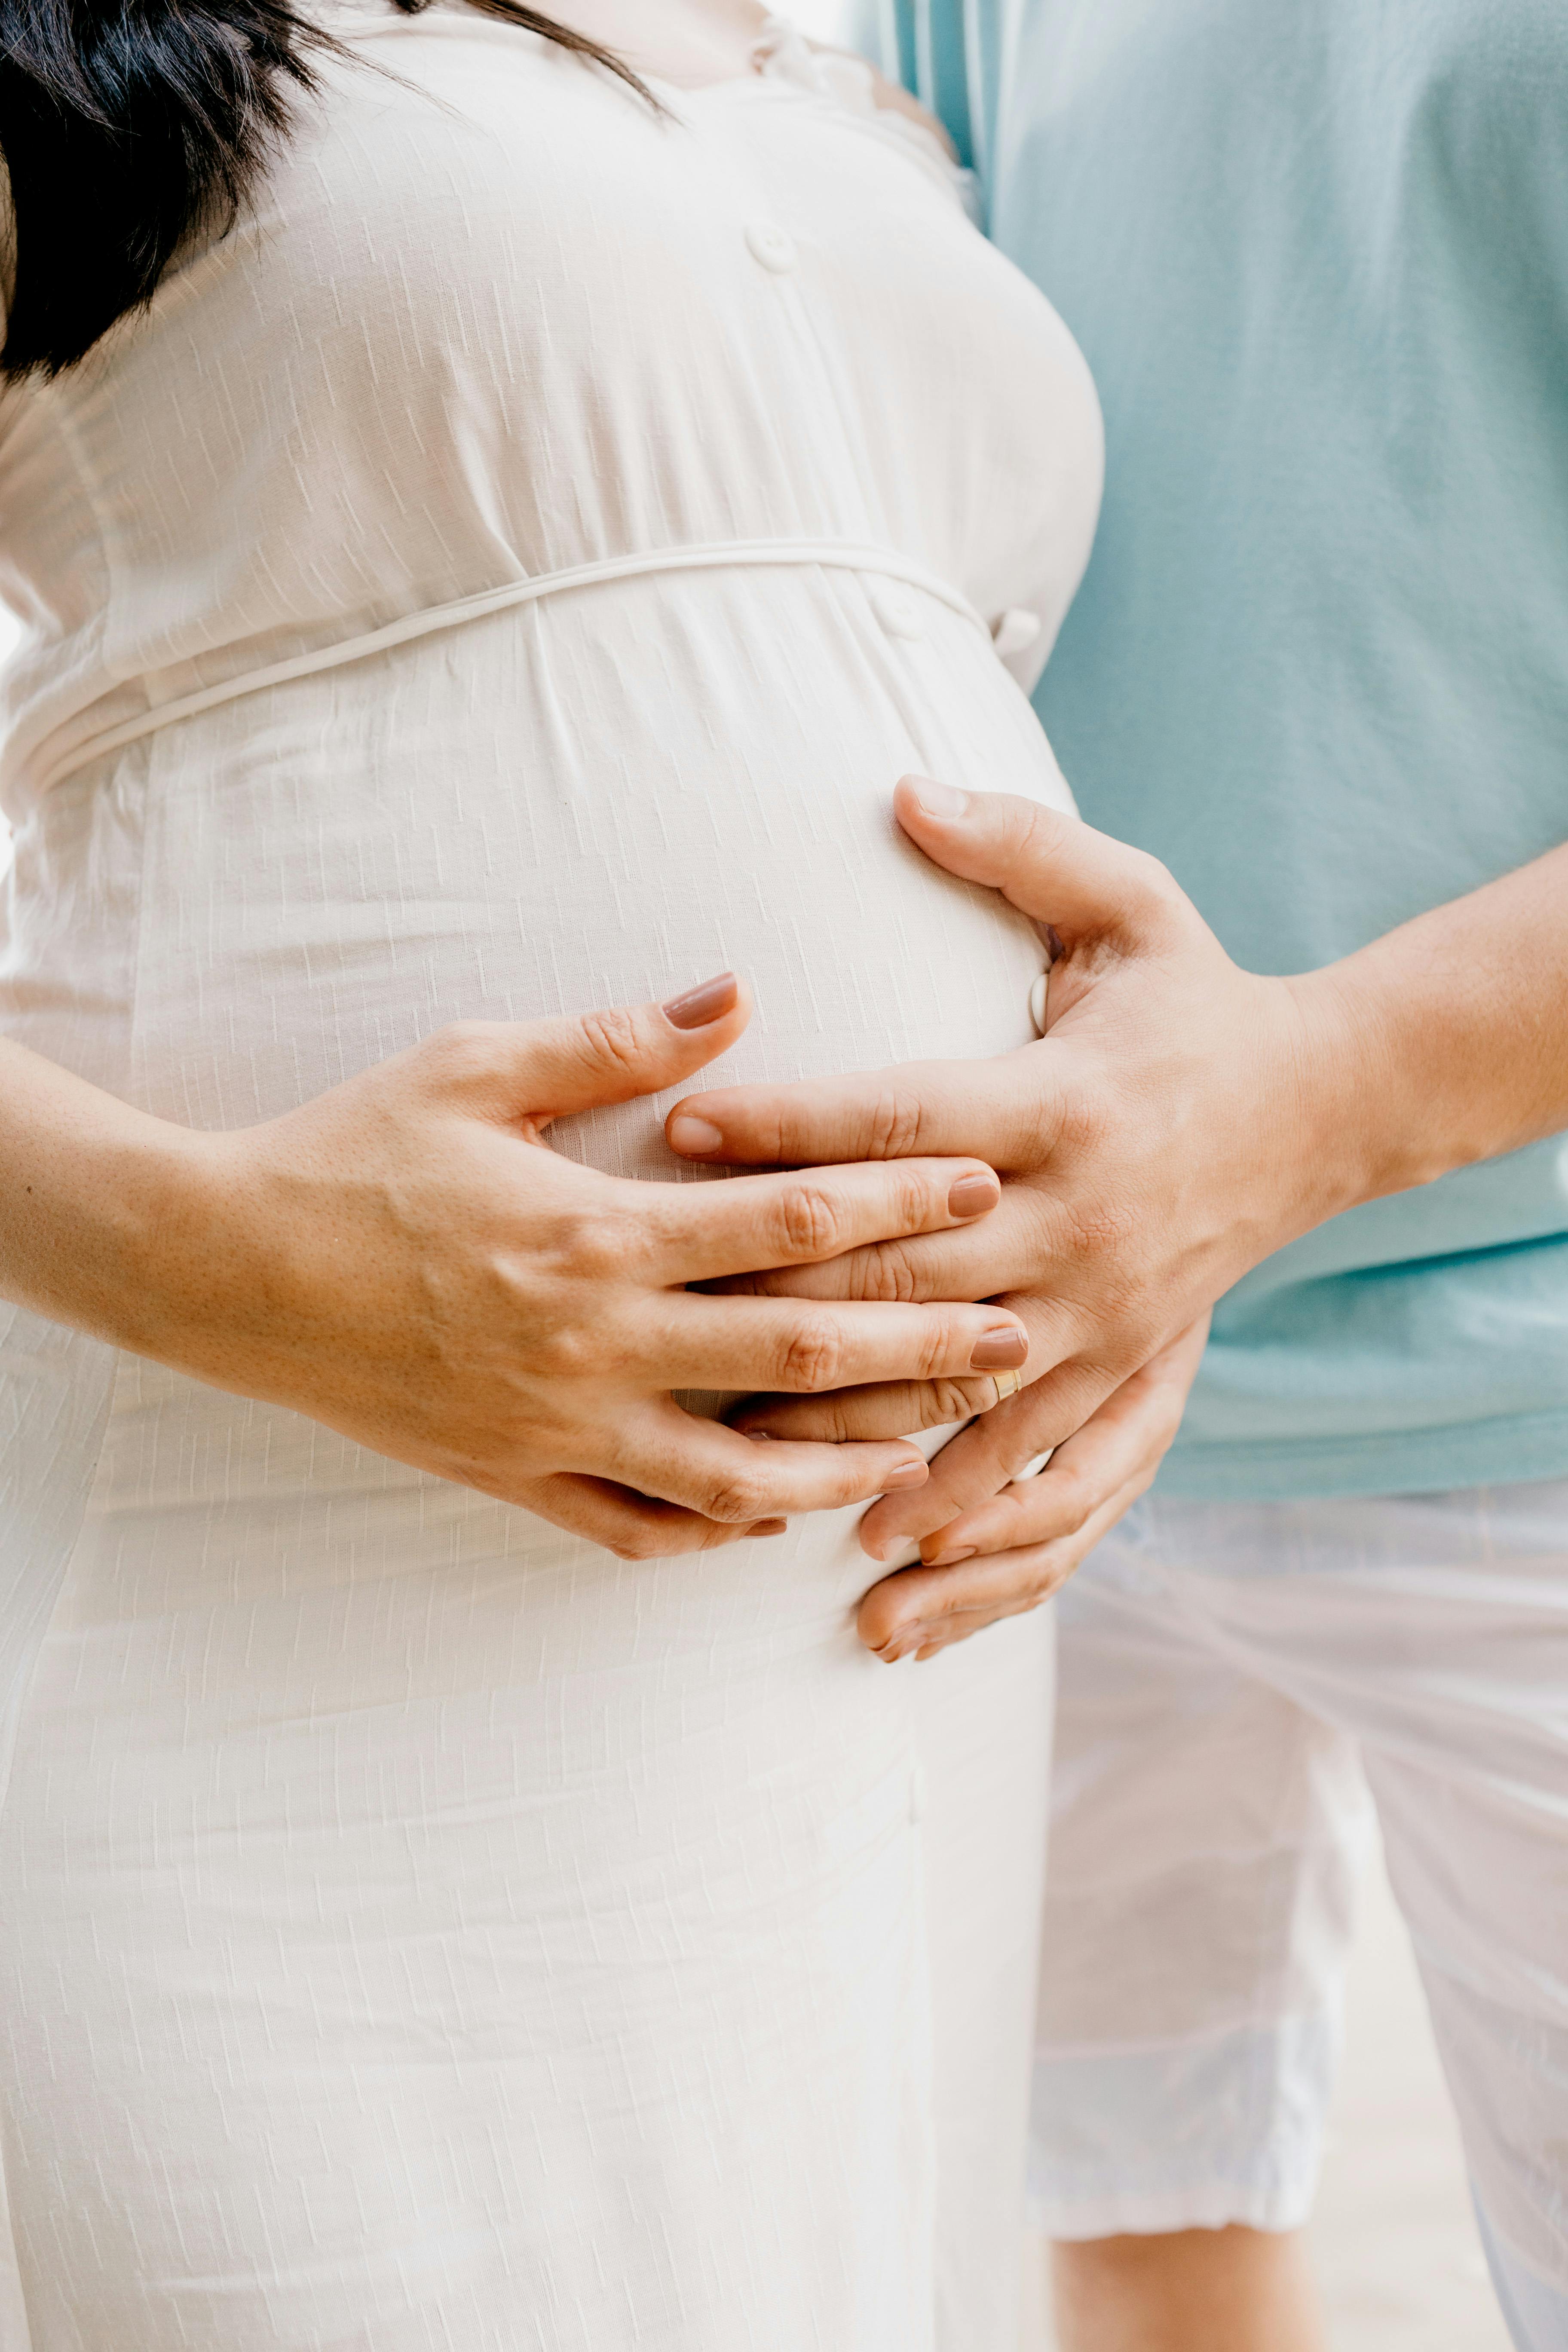 A couple holding the stomach of a pregnant woman | Source: Pexels